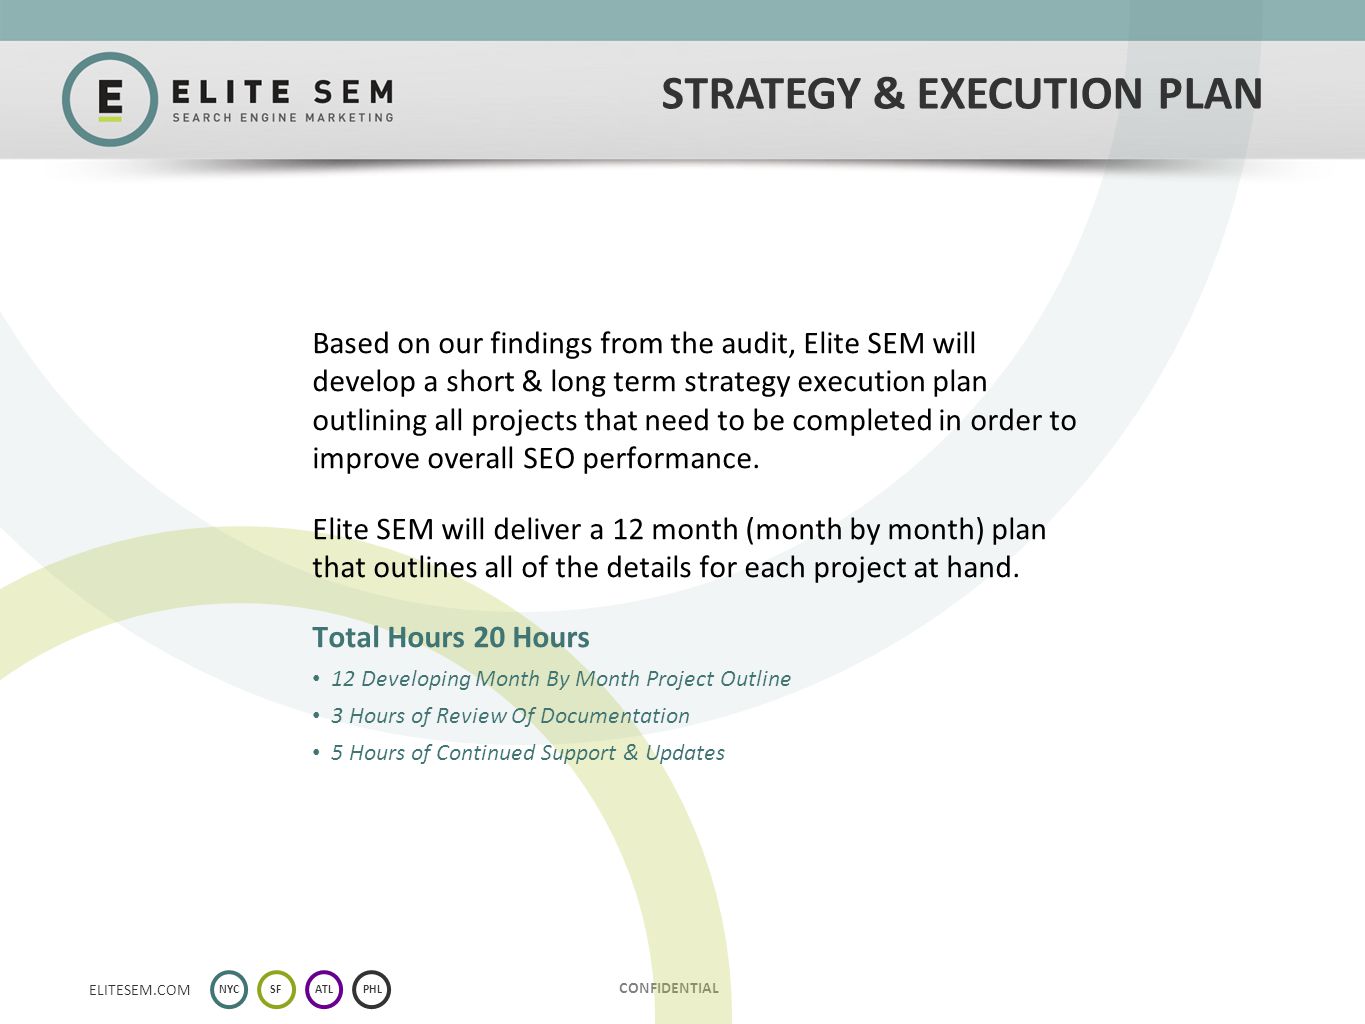 NYCSFATLPHL ELITESEM.COM CONFIDENTIAL STRATEGY & EXECUTION PLAN Based on our findings from the audit, Elite SEM will develop a short & long term strategy execution plan outlining all projects that need to be completed in order to improve overall SEO performance.